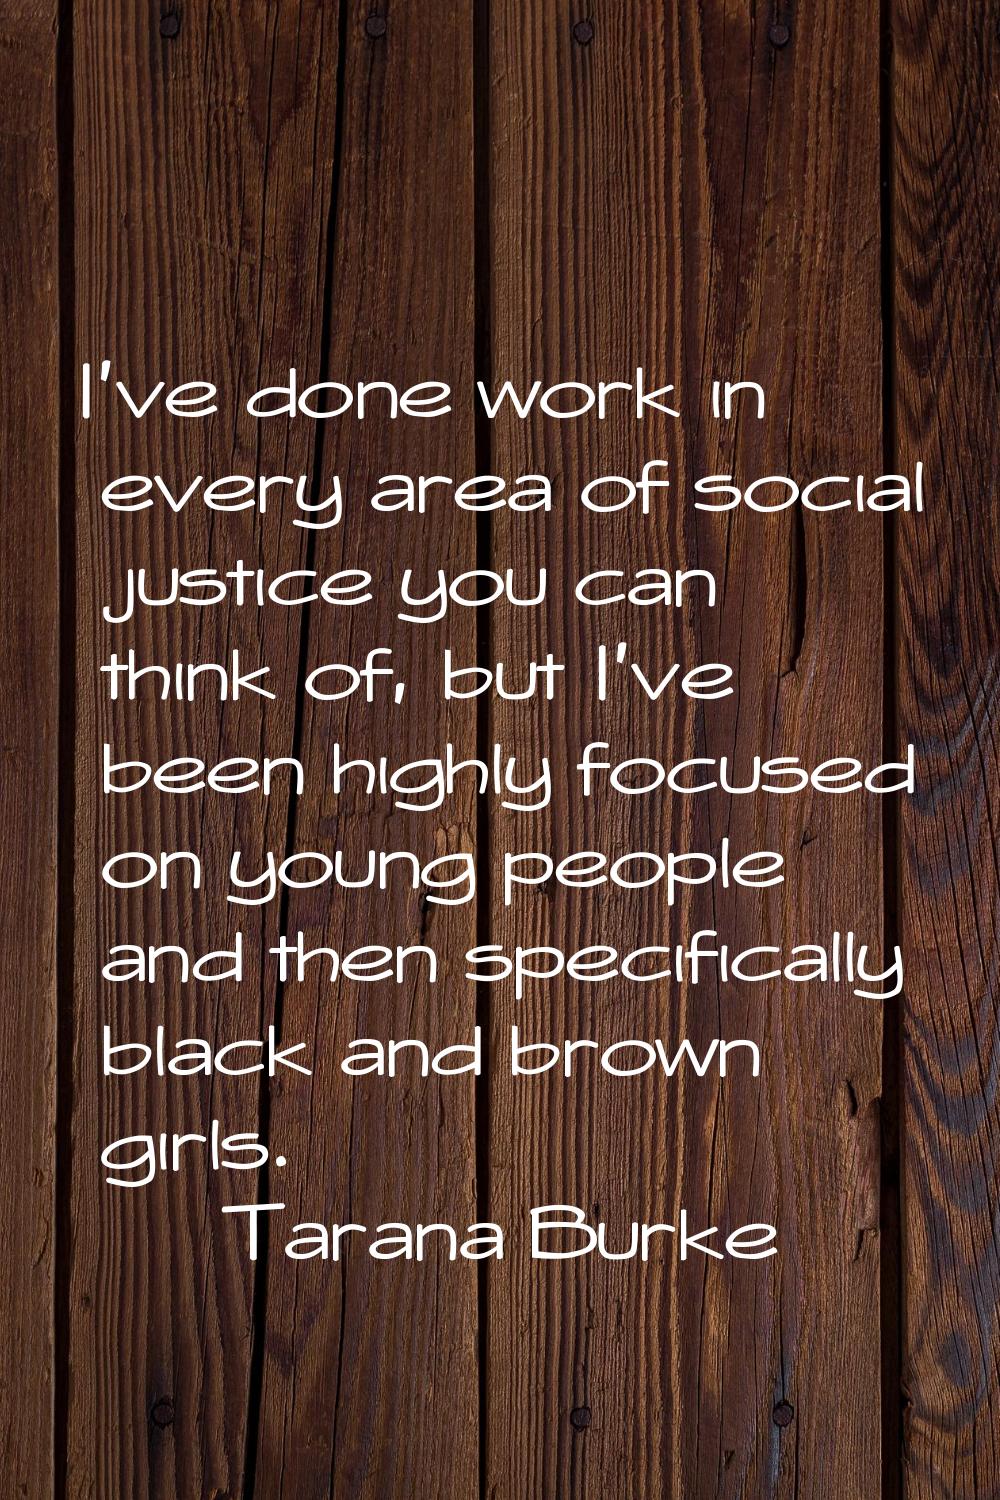 I've done work in every area of social justice you can think of, but I've been highly focused on yo